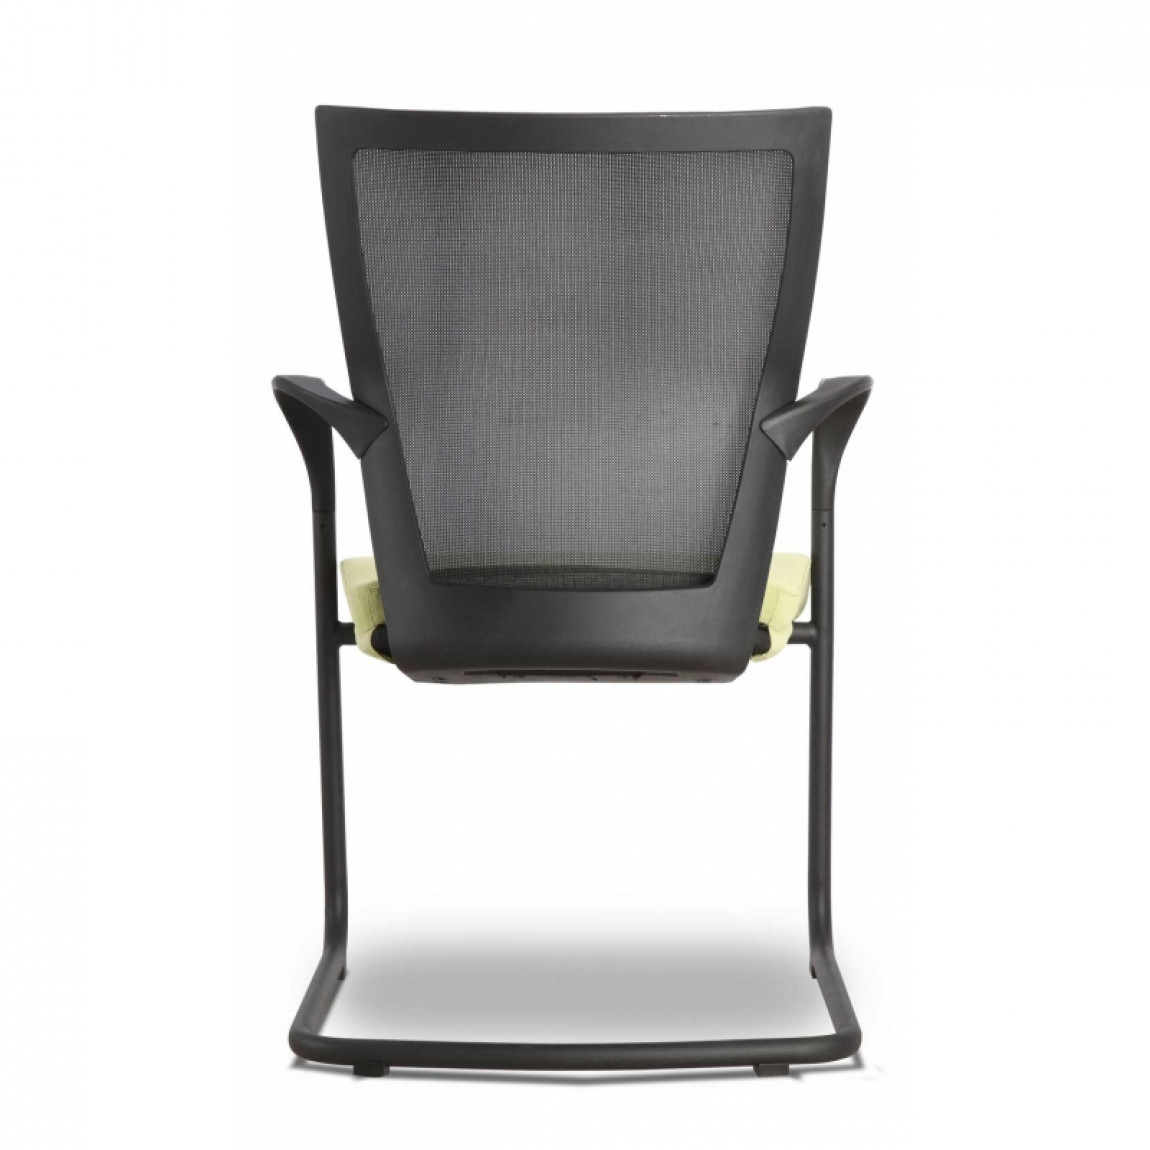 Stacking Guest Chair with Green Seat Cover